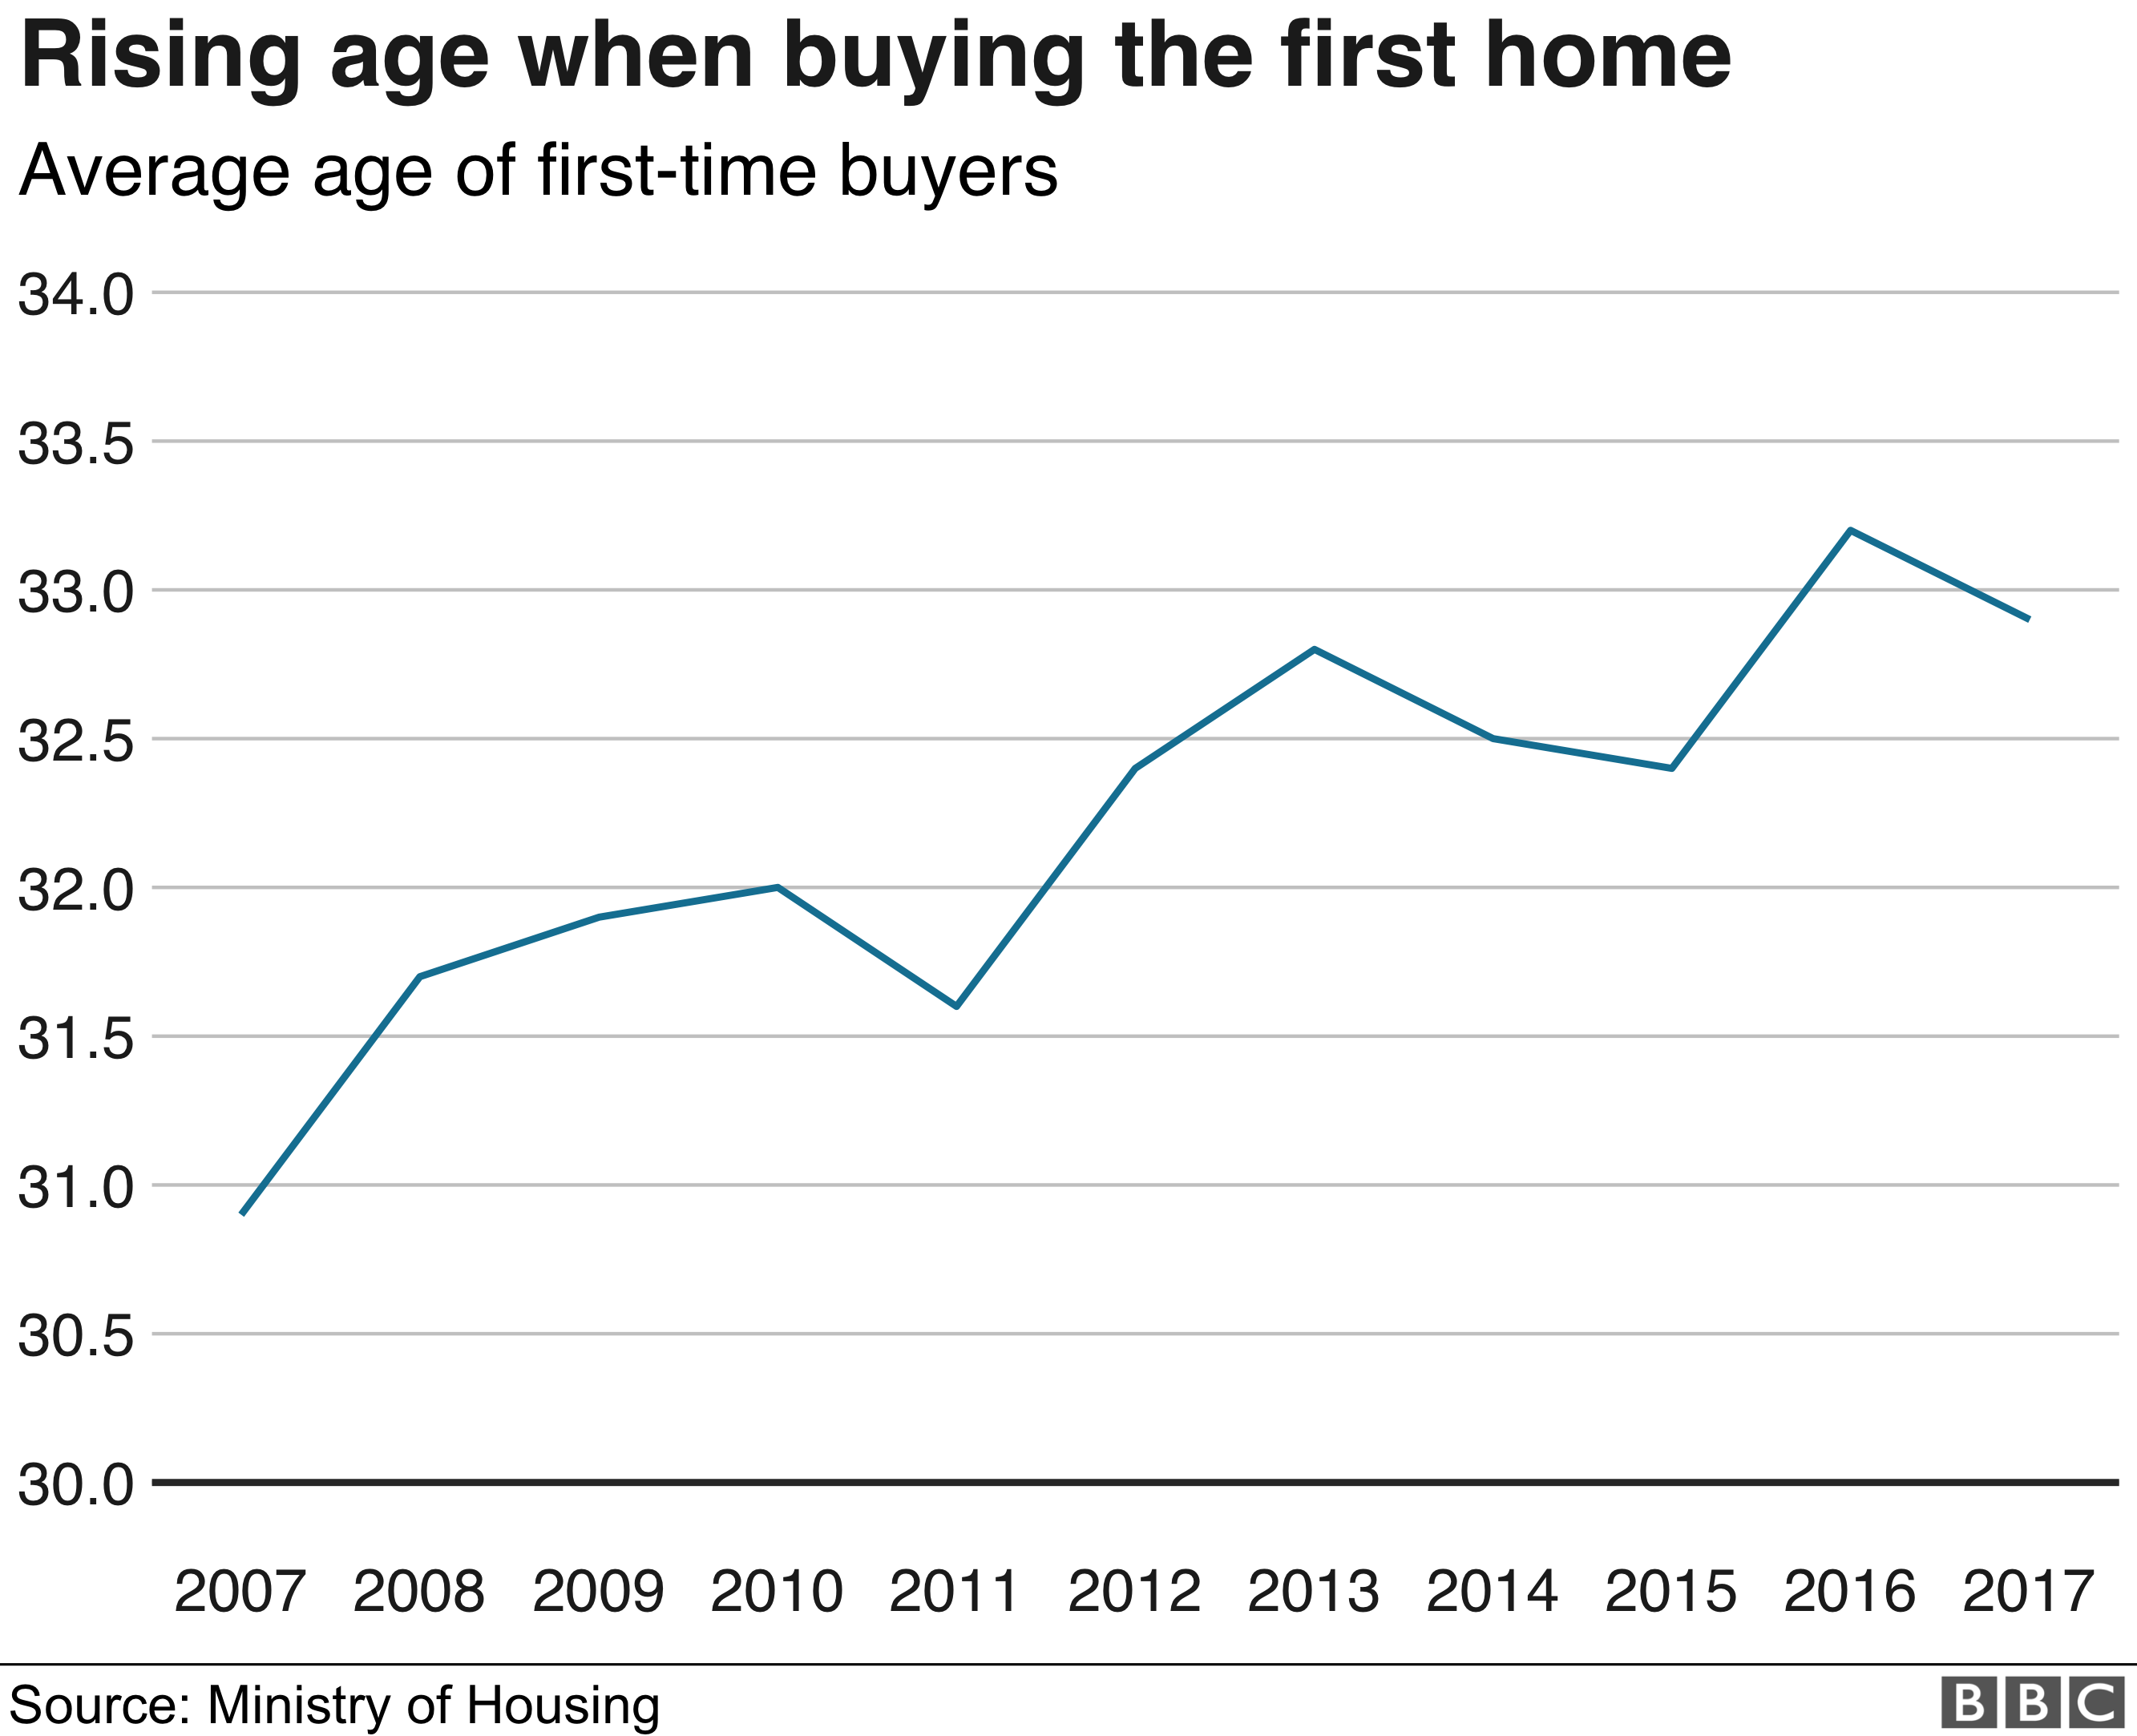 When do people buy their first home? BBC News